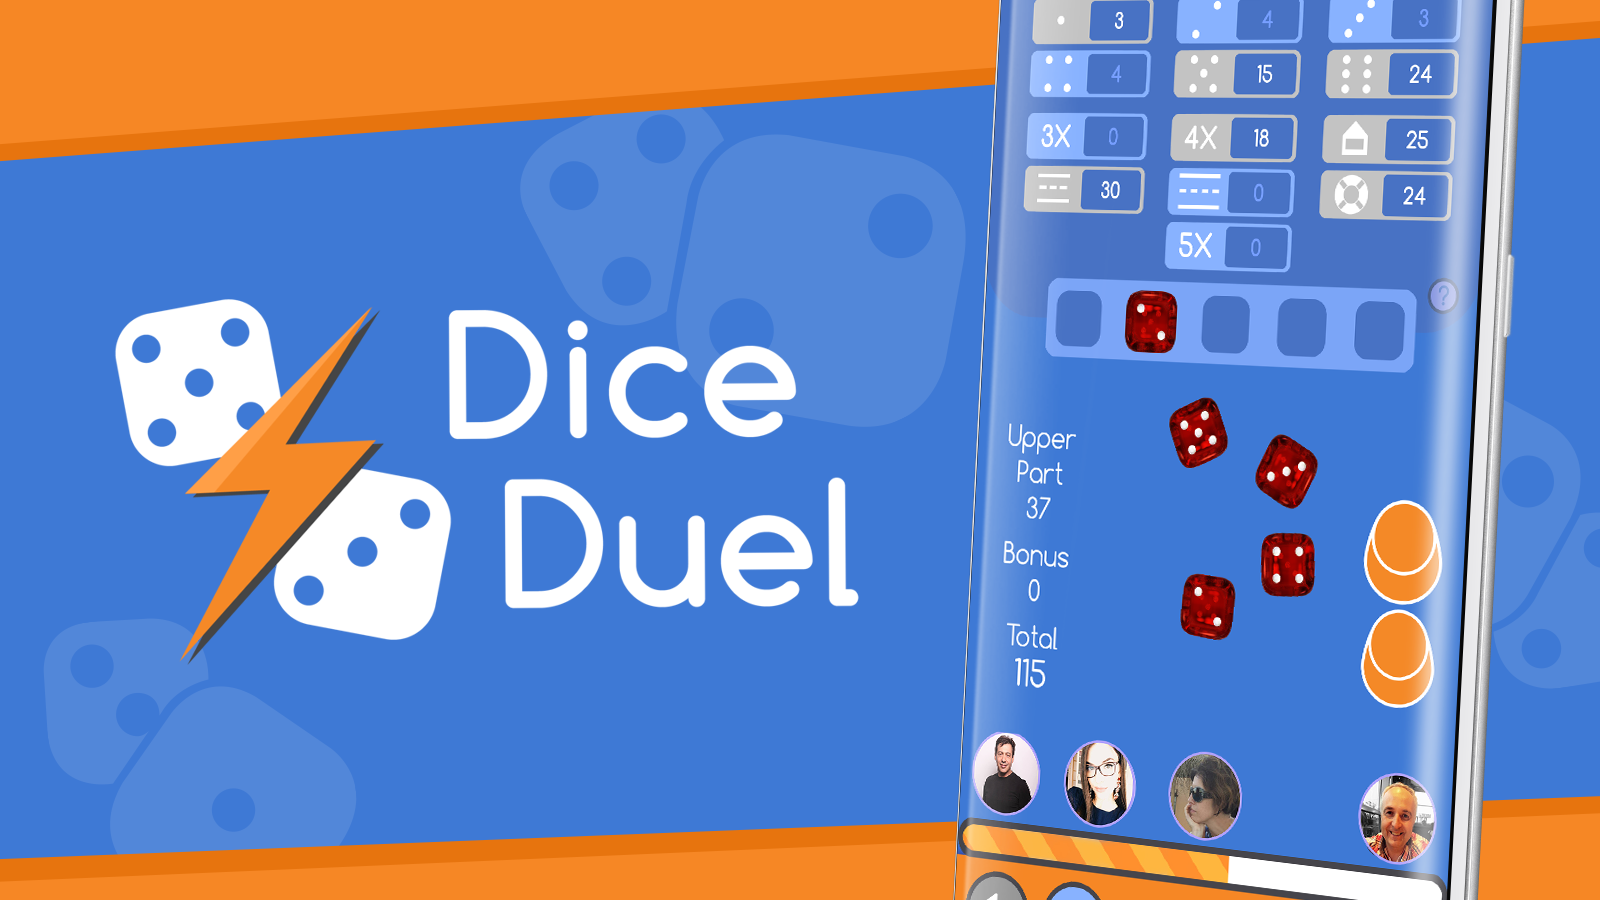 This dice game has dominated the App Store charts for 7 years